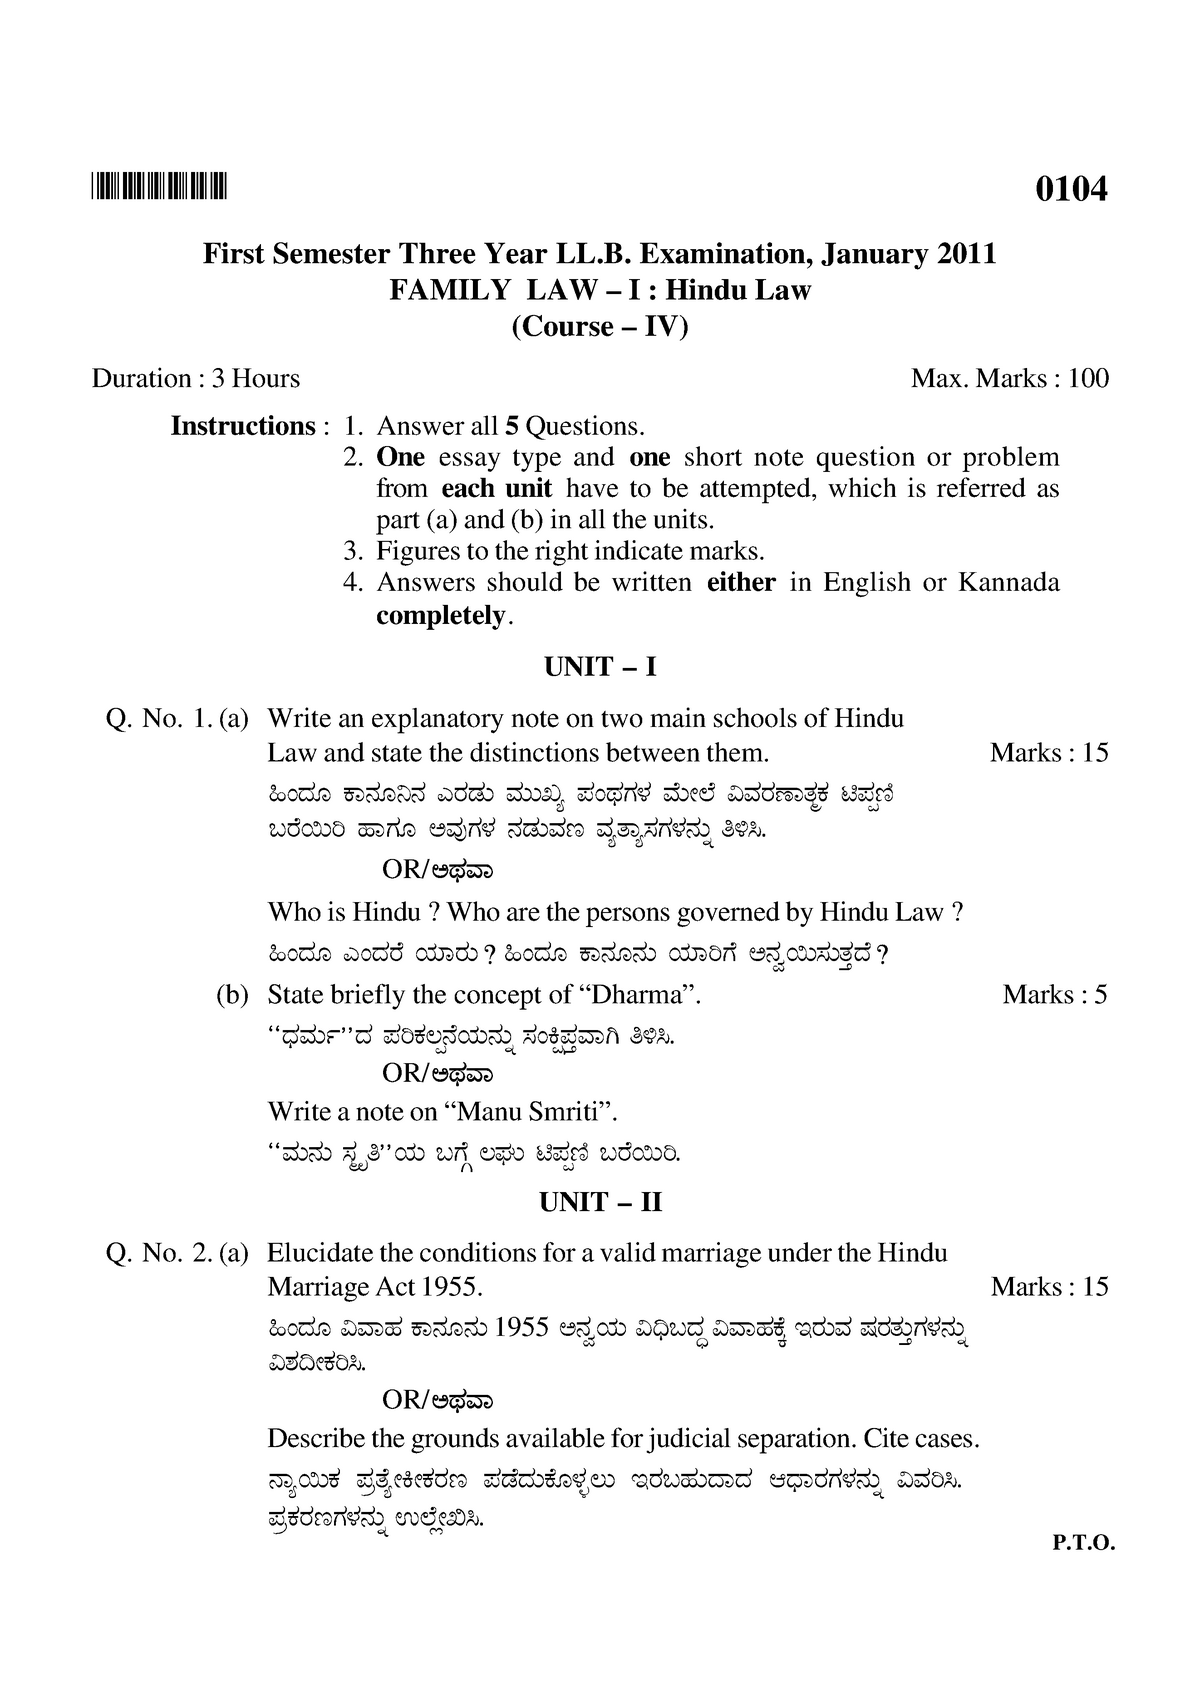 exam-question-papers-family-law-1-hindu-law-kslu-bhihrb-0104-first